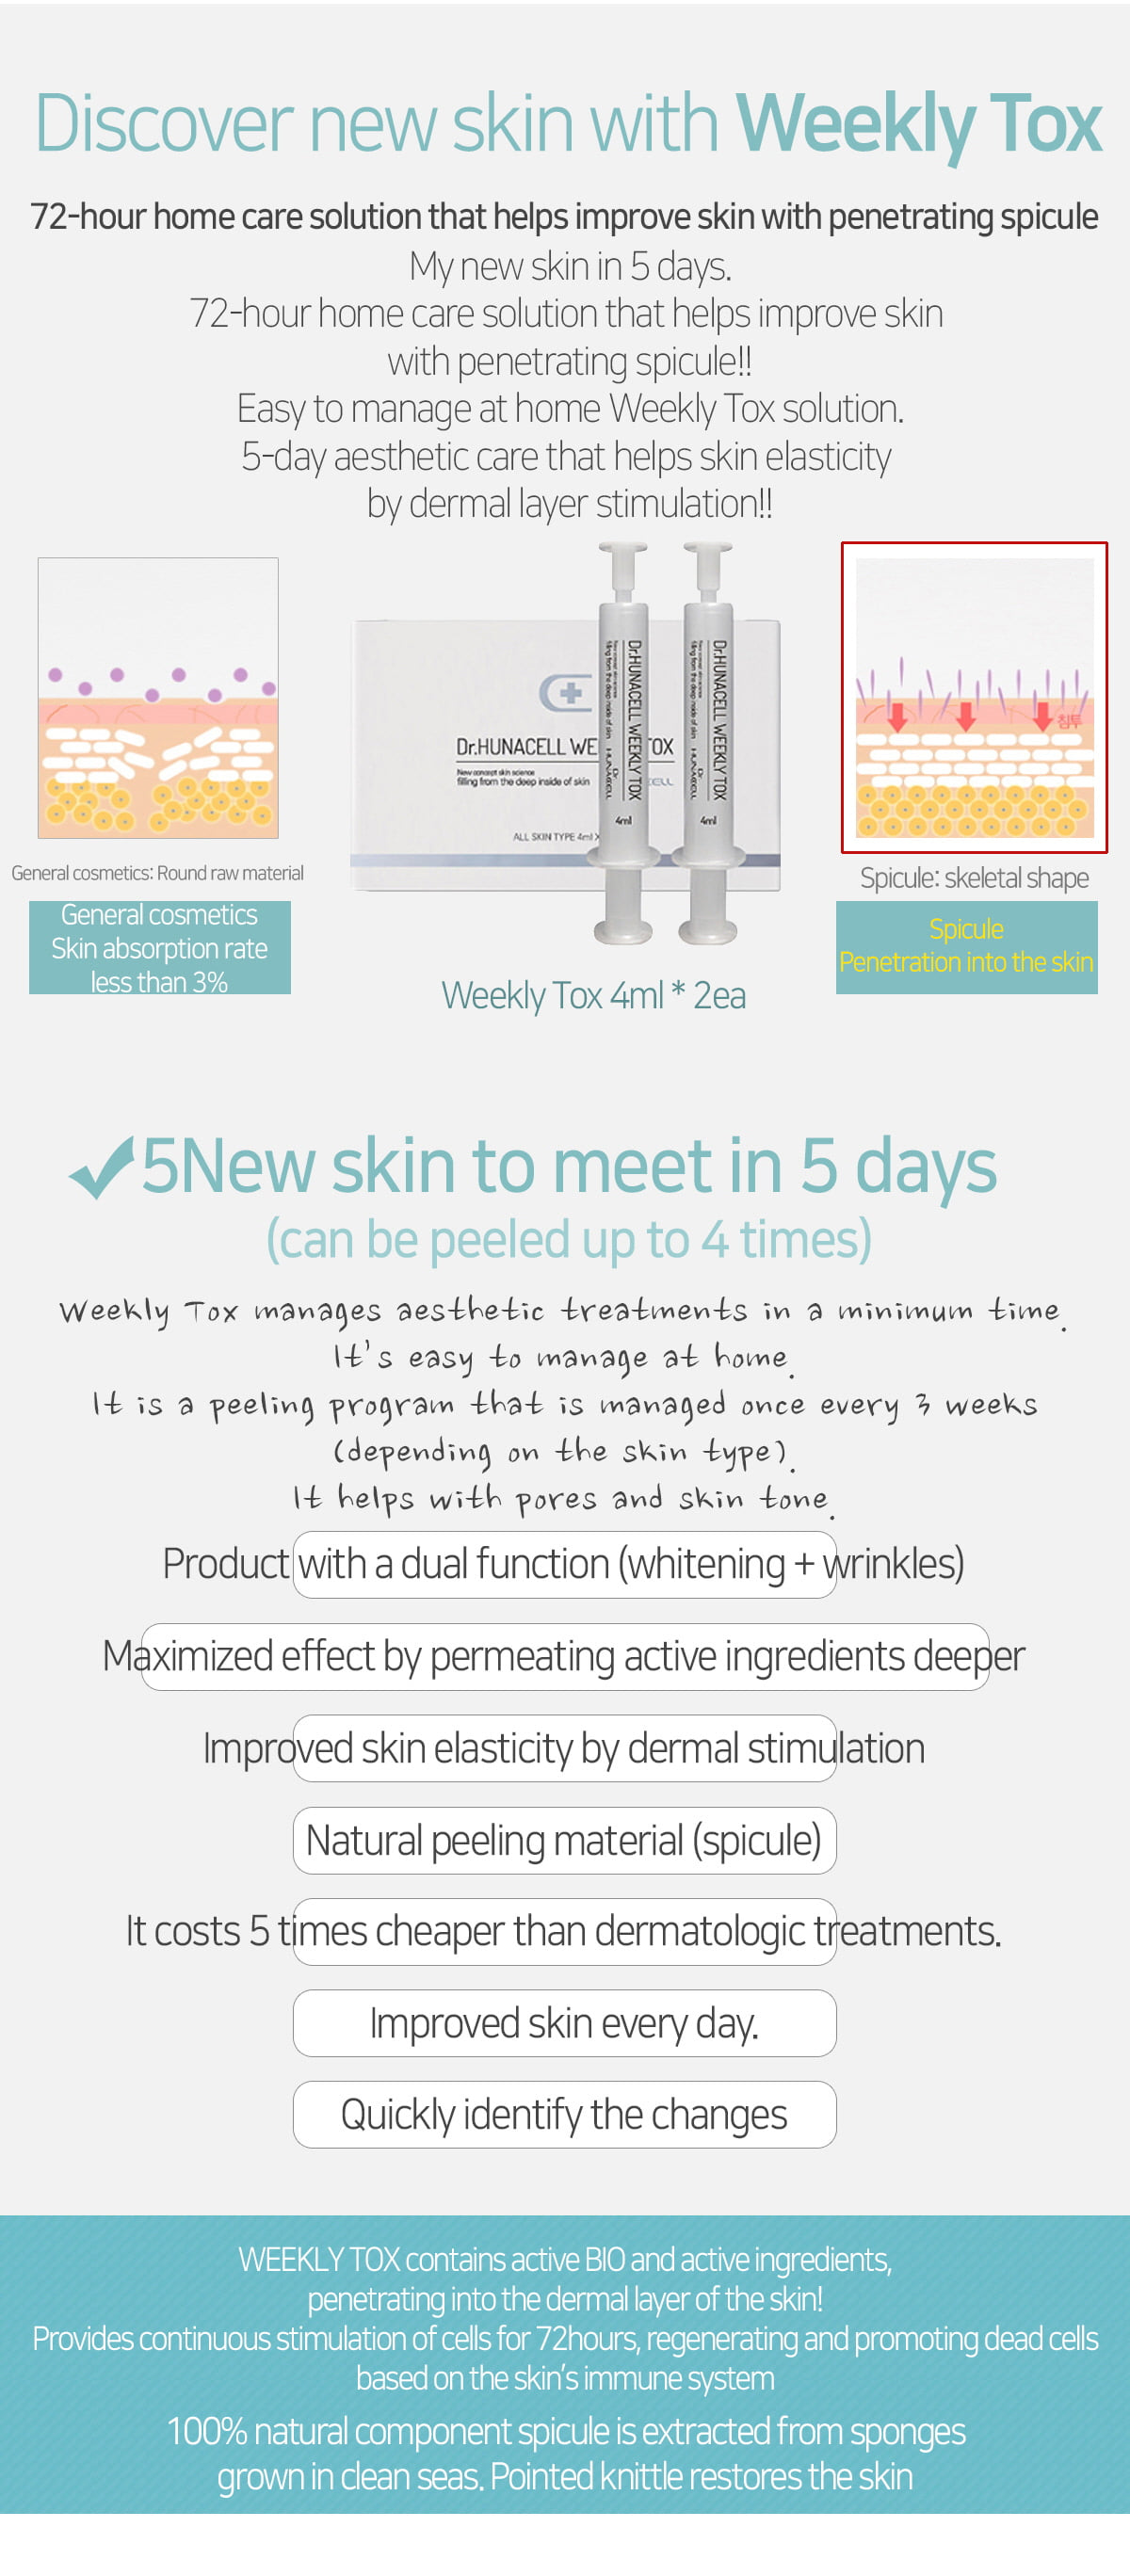 WEEKLY TOX (4ML X 2EA) Spicule  Skin care  Moisturizing  Protection  Soothing Skin  Special care  Wrinkle-improving cosmetics  Elasticity cream